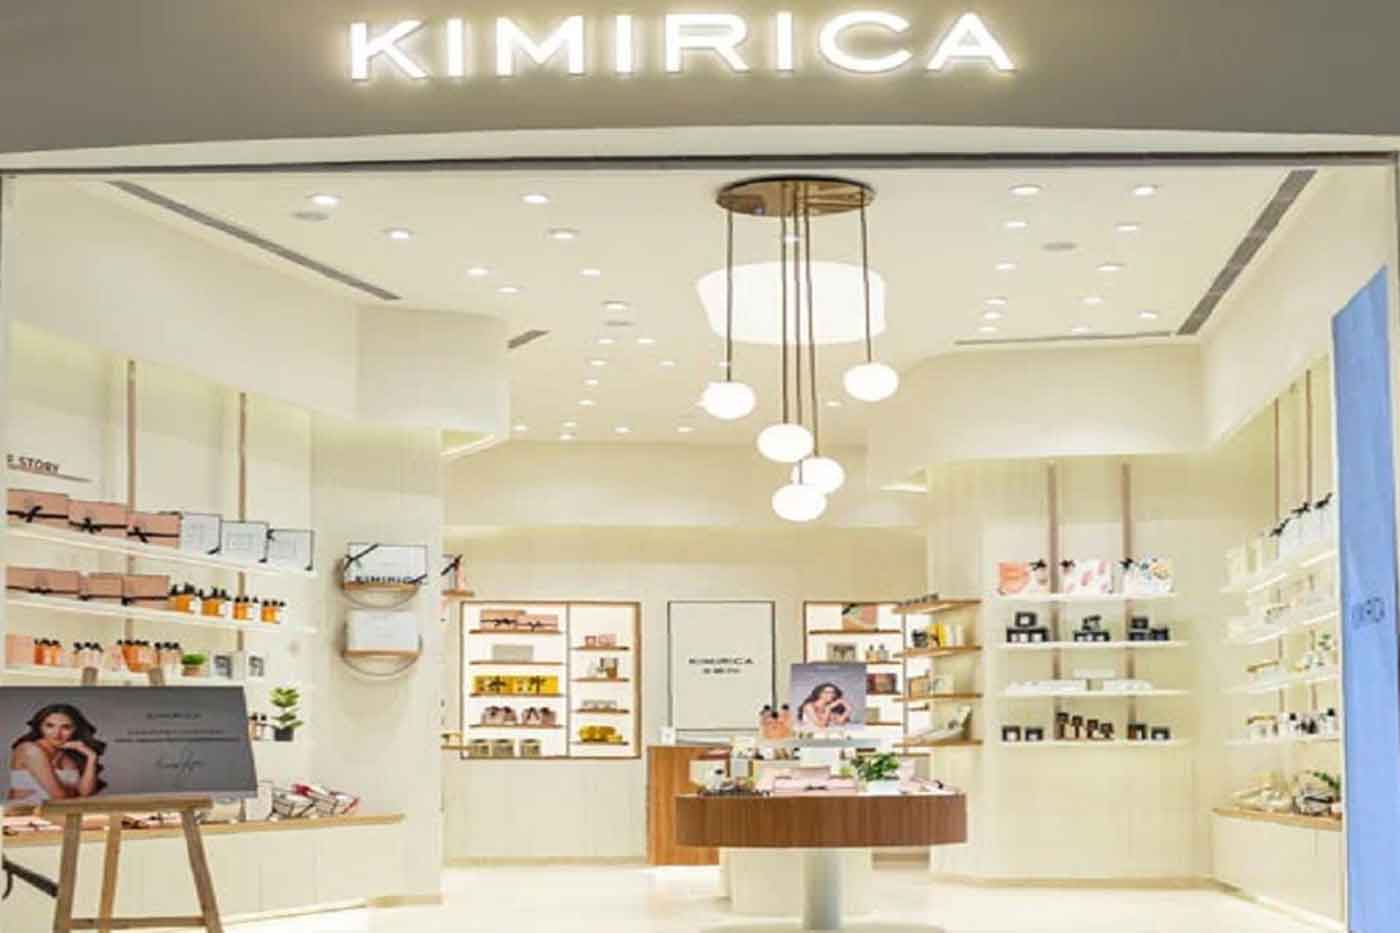 Kimirica to take over Indian skincare industry